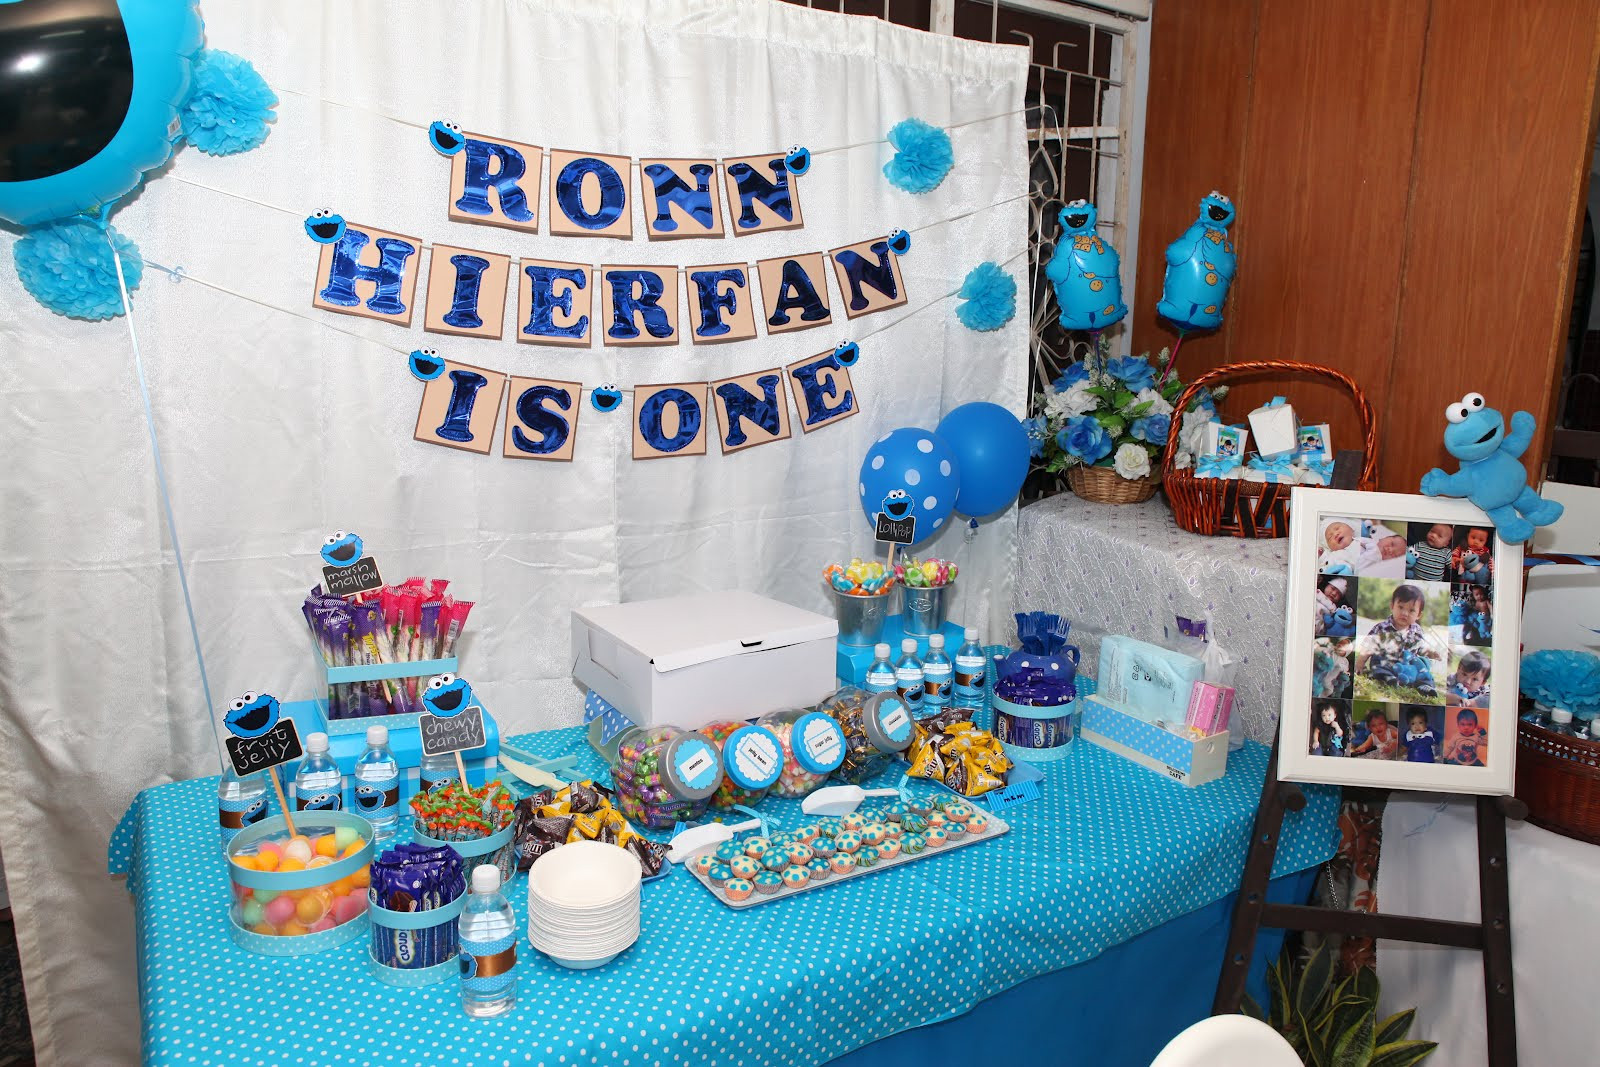 Cookie Monster Birthday Party Ideas
 Do sDesign Ronn s 1st COOKIE MONSTER BIRTHDAY PARTY